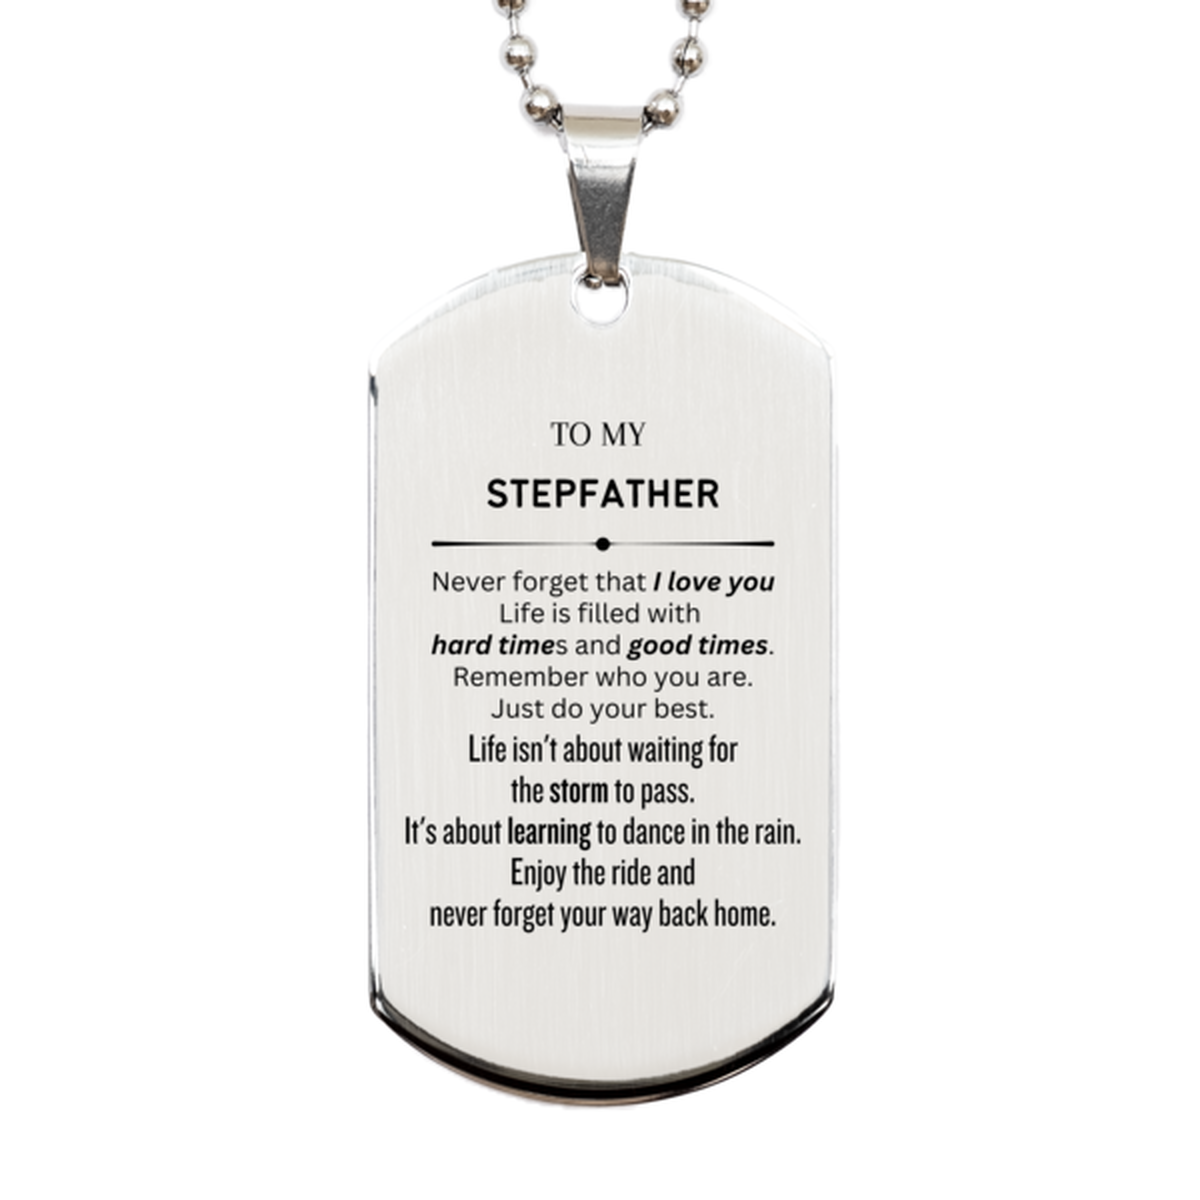 Christmas Stepfather Silver Dog Tag Gifts, To My Stepfather Birthday Thank You Gifts For Stepfather, Graduation Unique Gifts For Stepfather To My Stepfather Never forget that I love you life is filled with hard times and good times. Remember who you are.